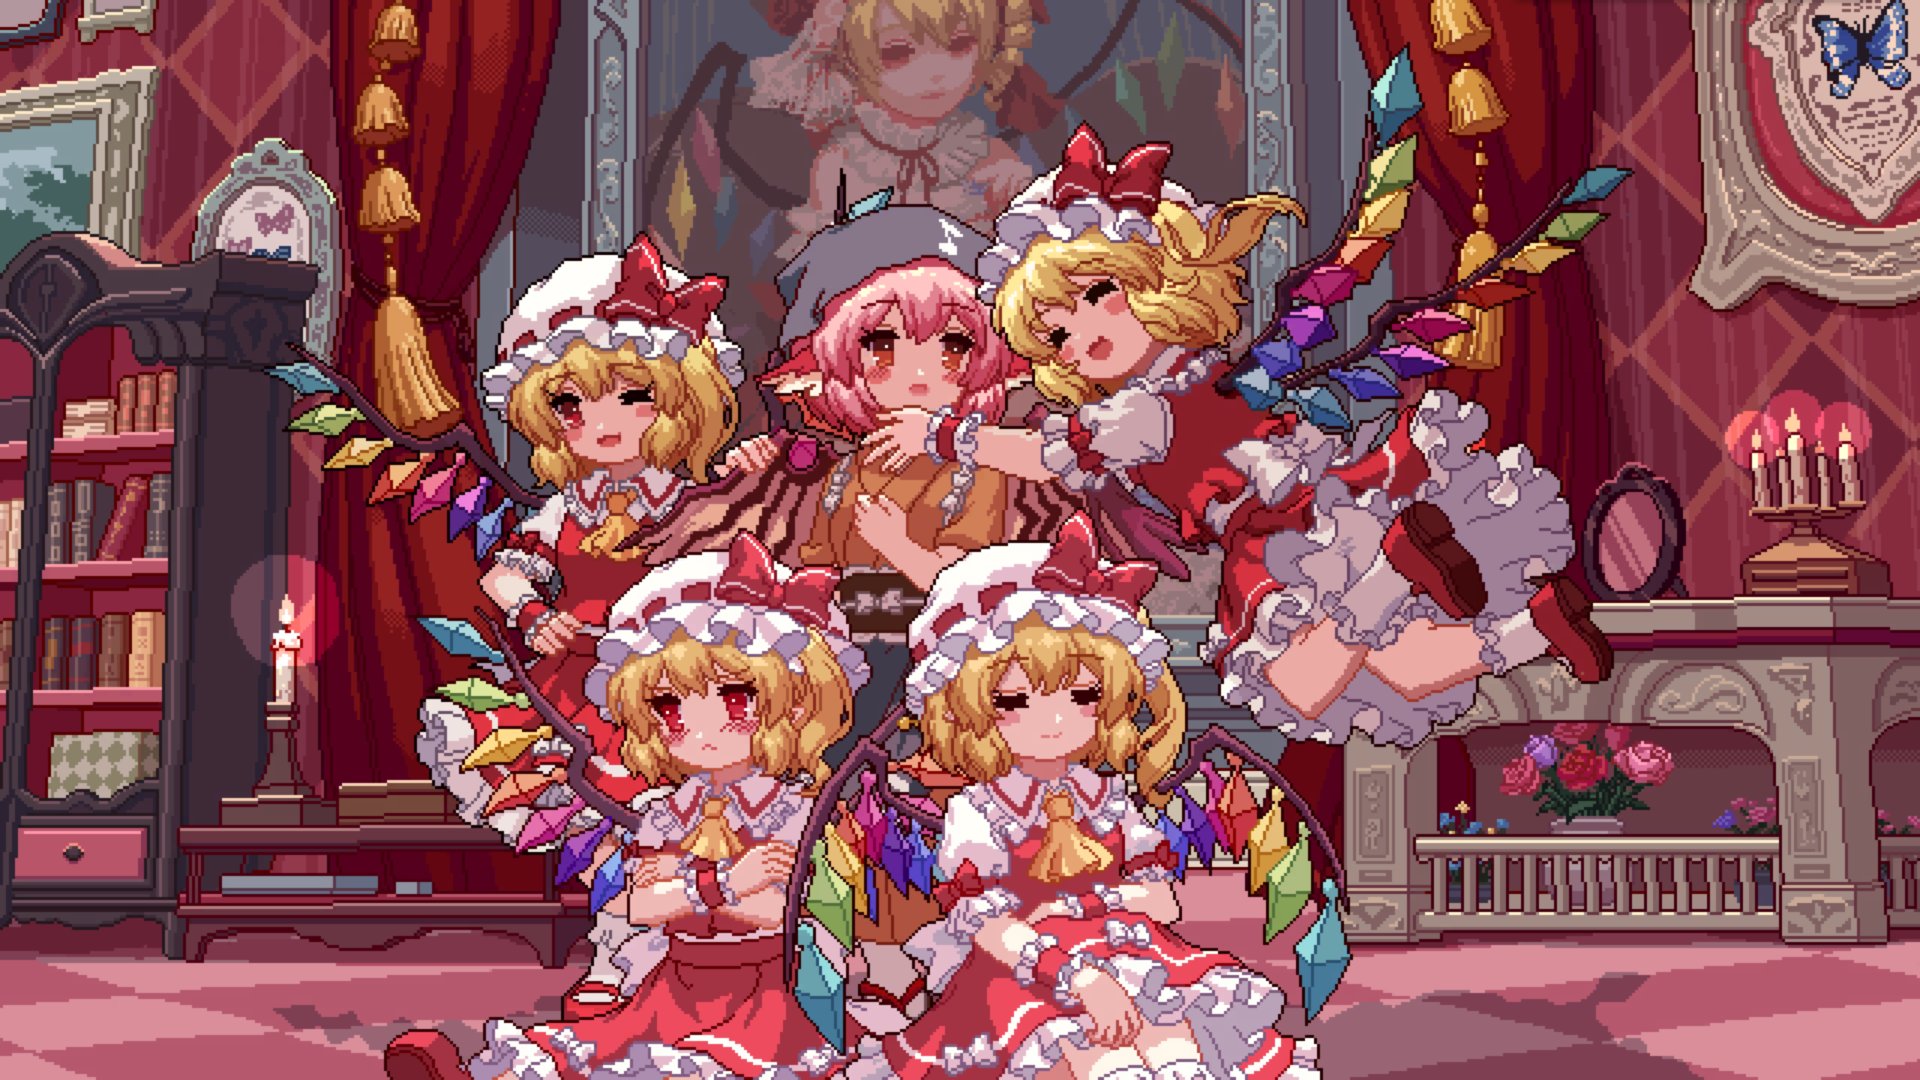 Anime 1920x1080 Touhou pixel art digital art Flandre Scarlet arms crossed anime girls pixels wings dress hat bow tie candles flowers butterfly picture frames bookshelves short hair